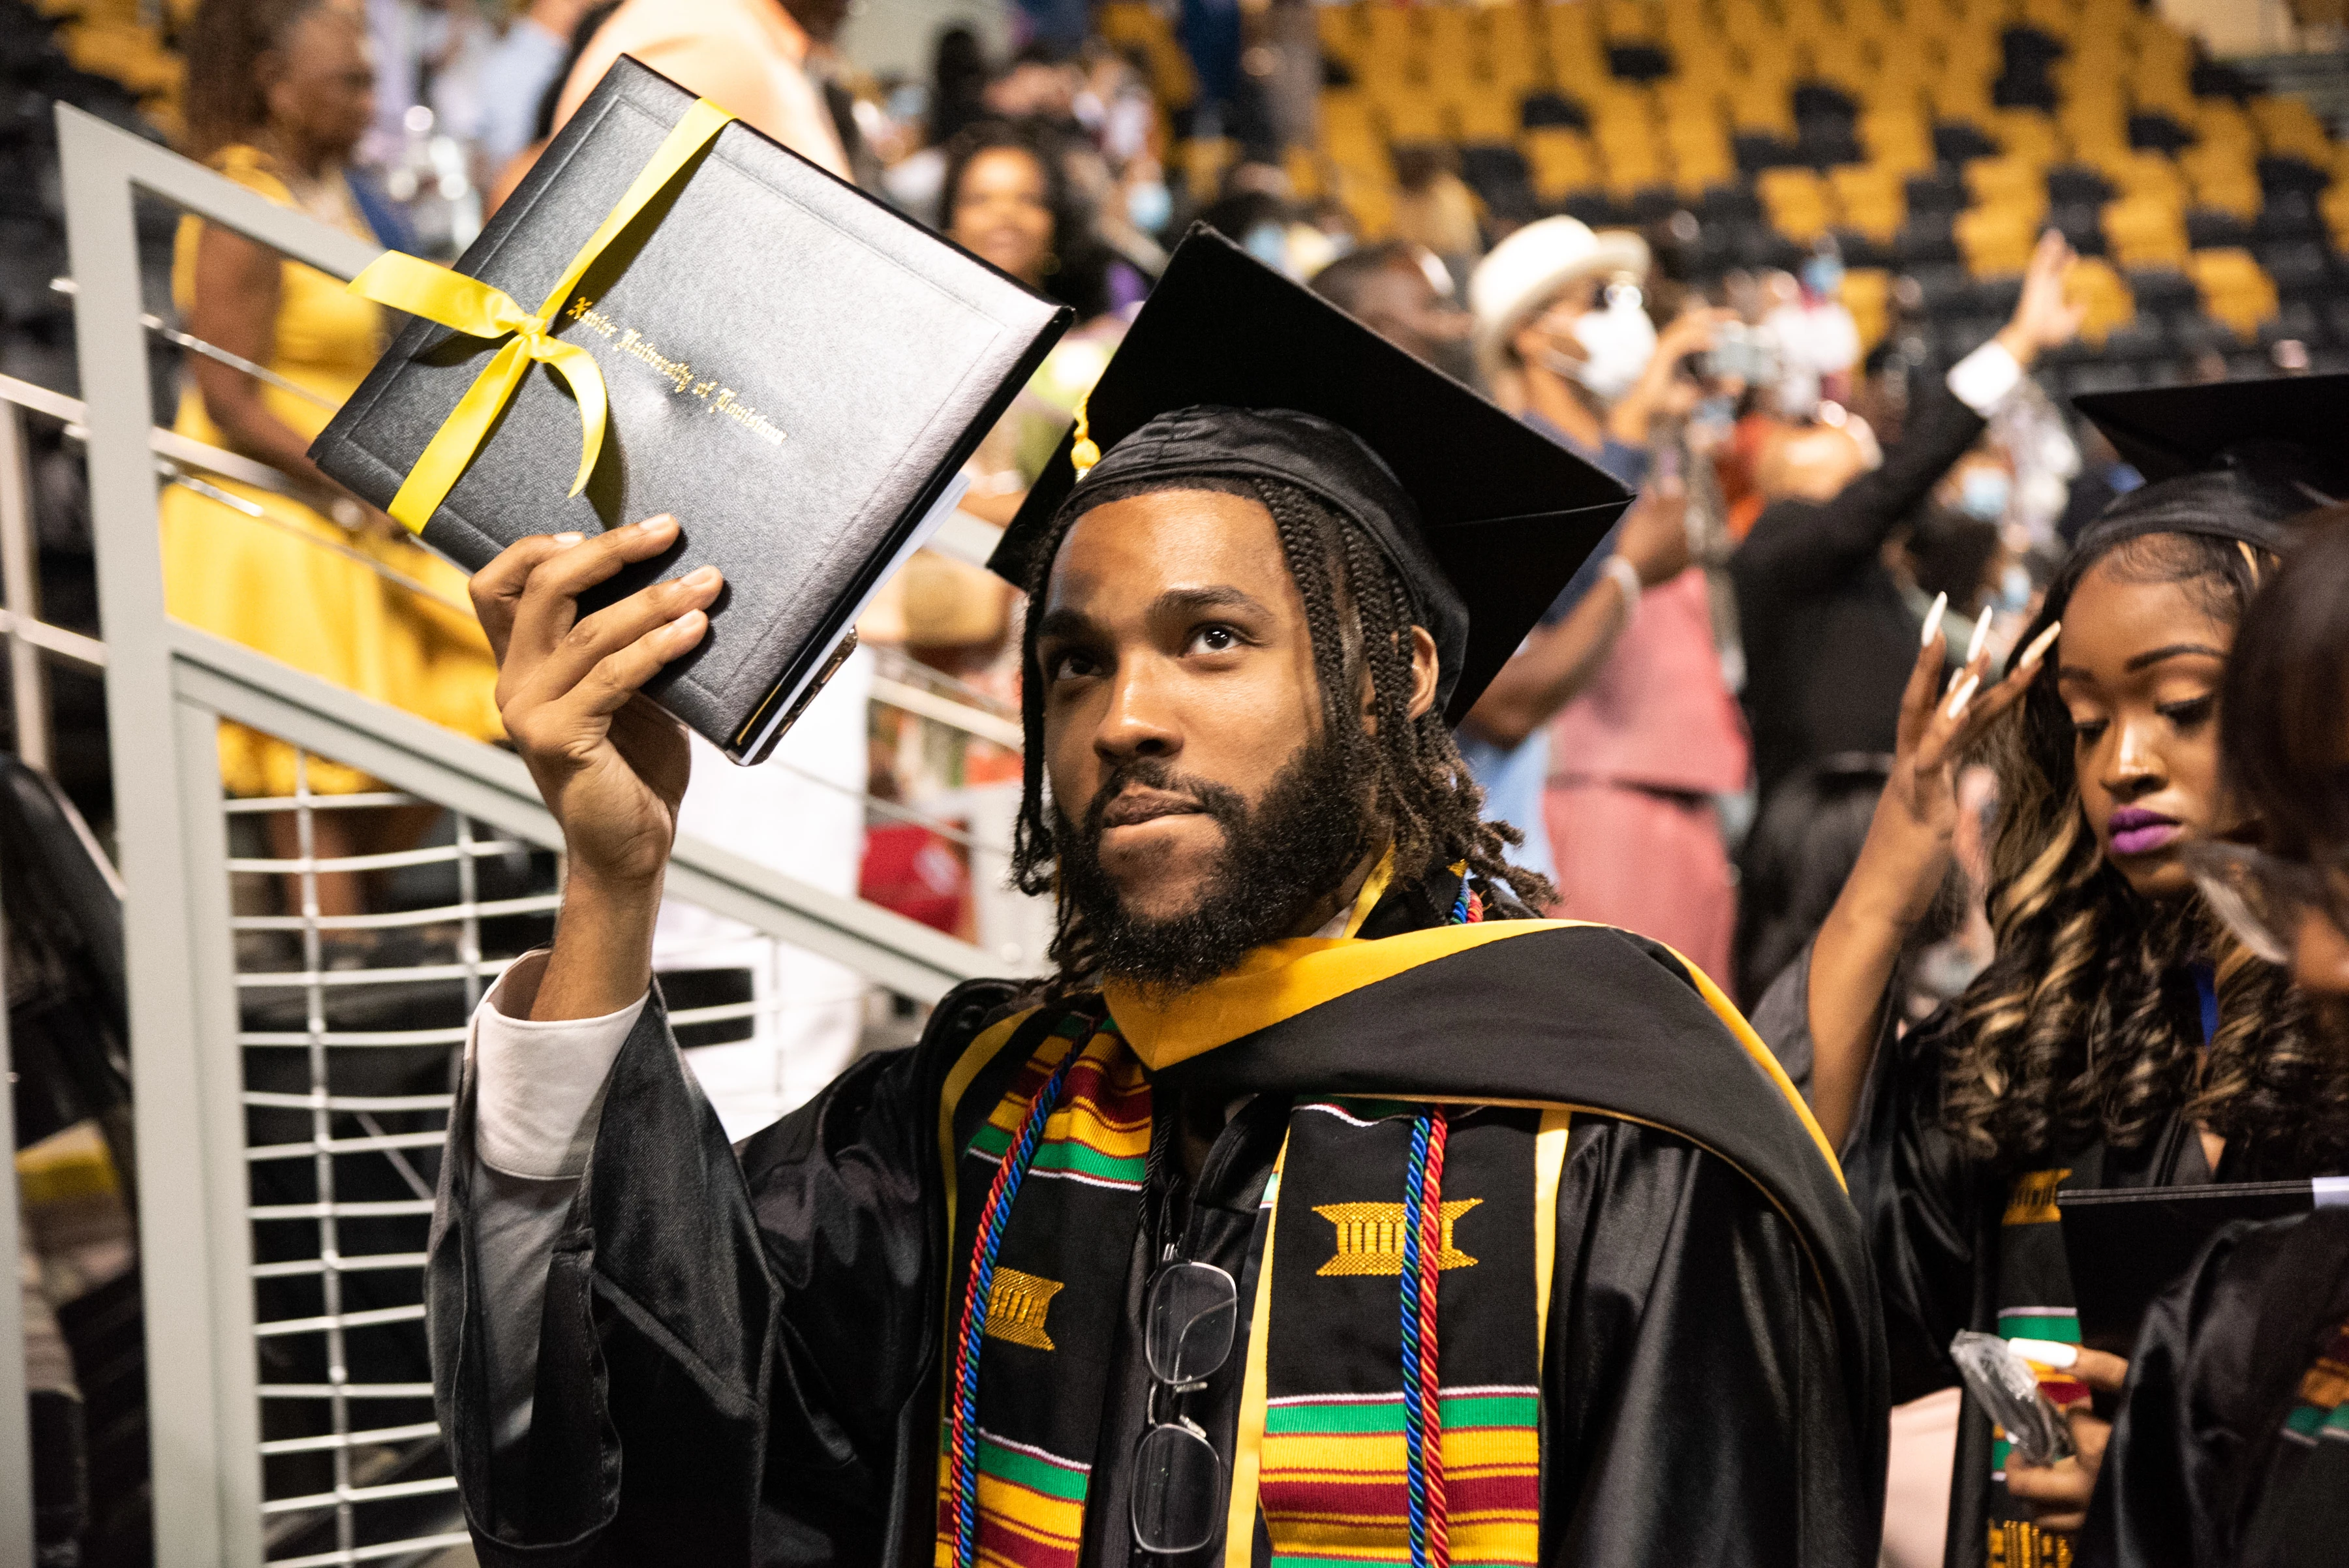 An African American man with a beard in a cap and gown holding up his diploma at a graduation ceremony